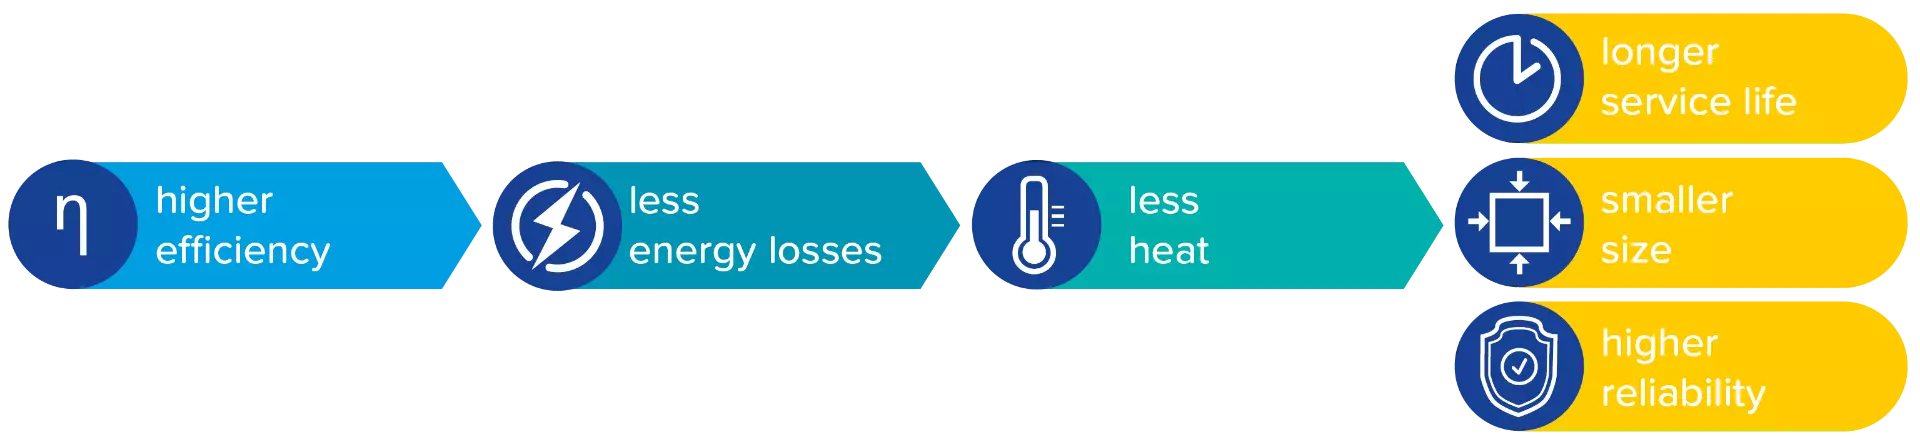 A high efficiency leads to less energy loss in the form of heat. This is reflected in a longer service lifetime of the power supply units, a smaller design and higher reliability.